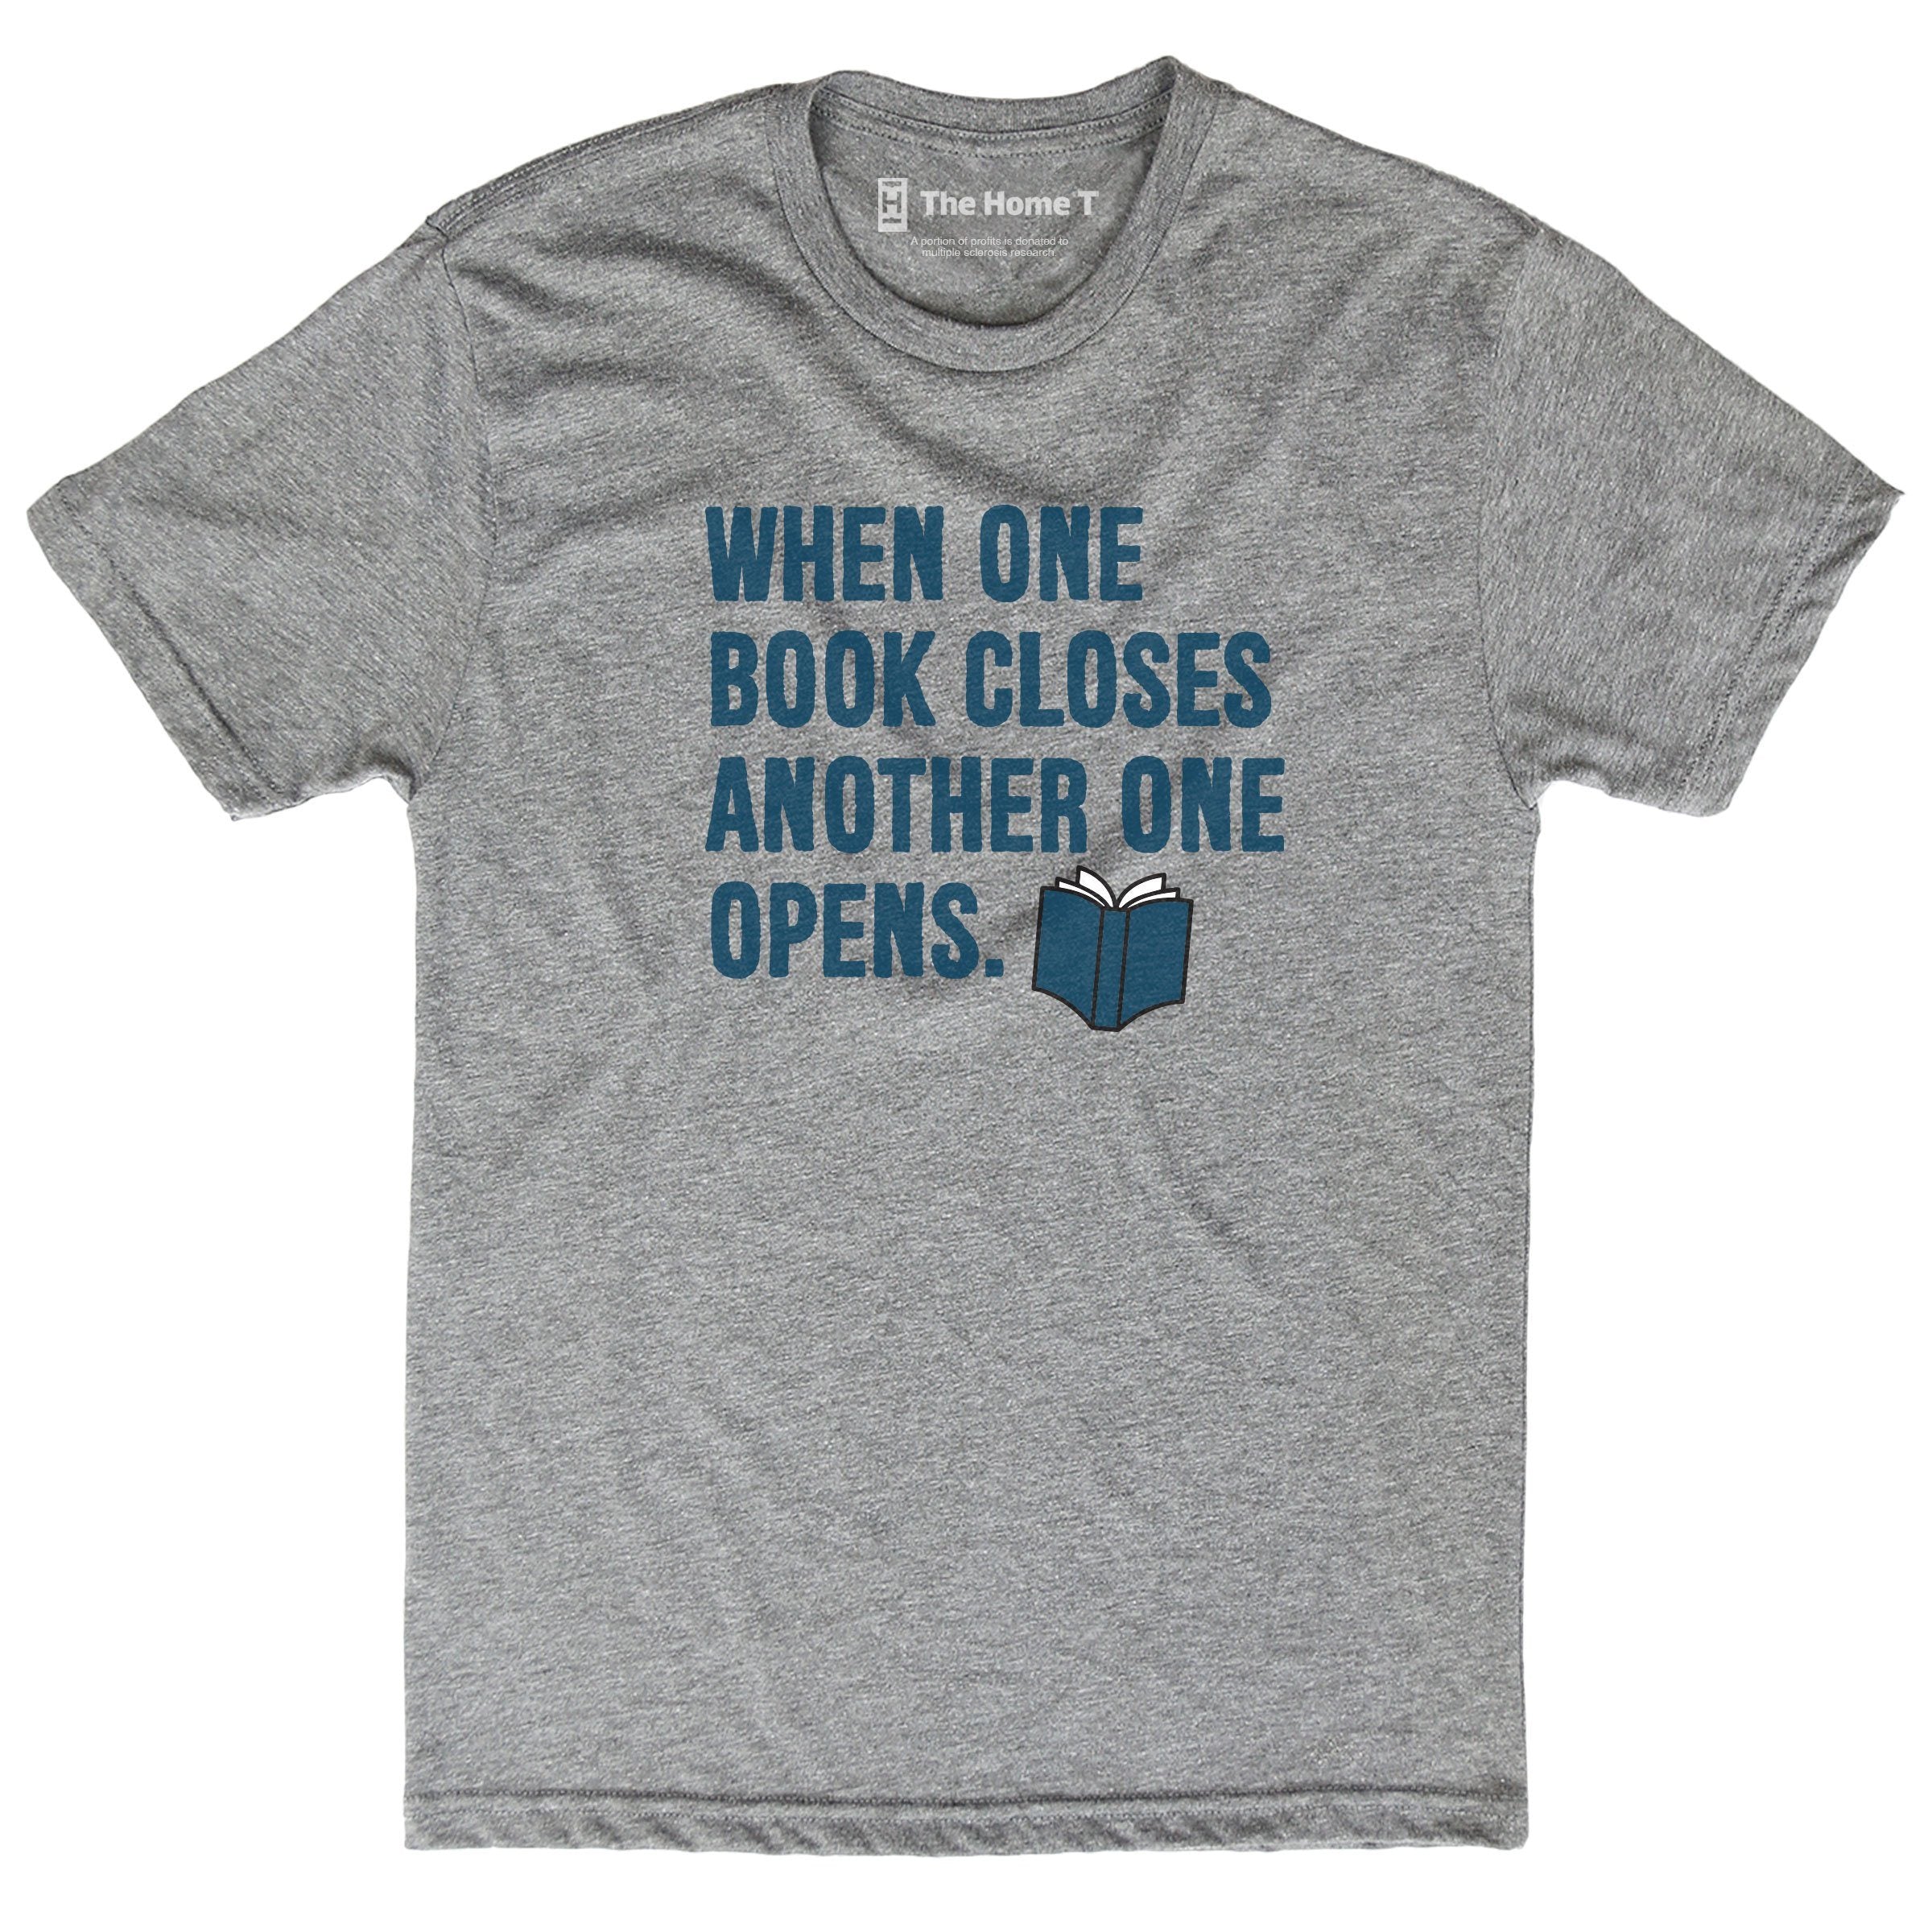 One Book Closes The Home T XS CREW NECK